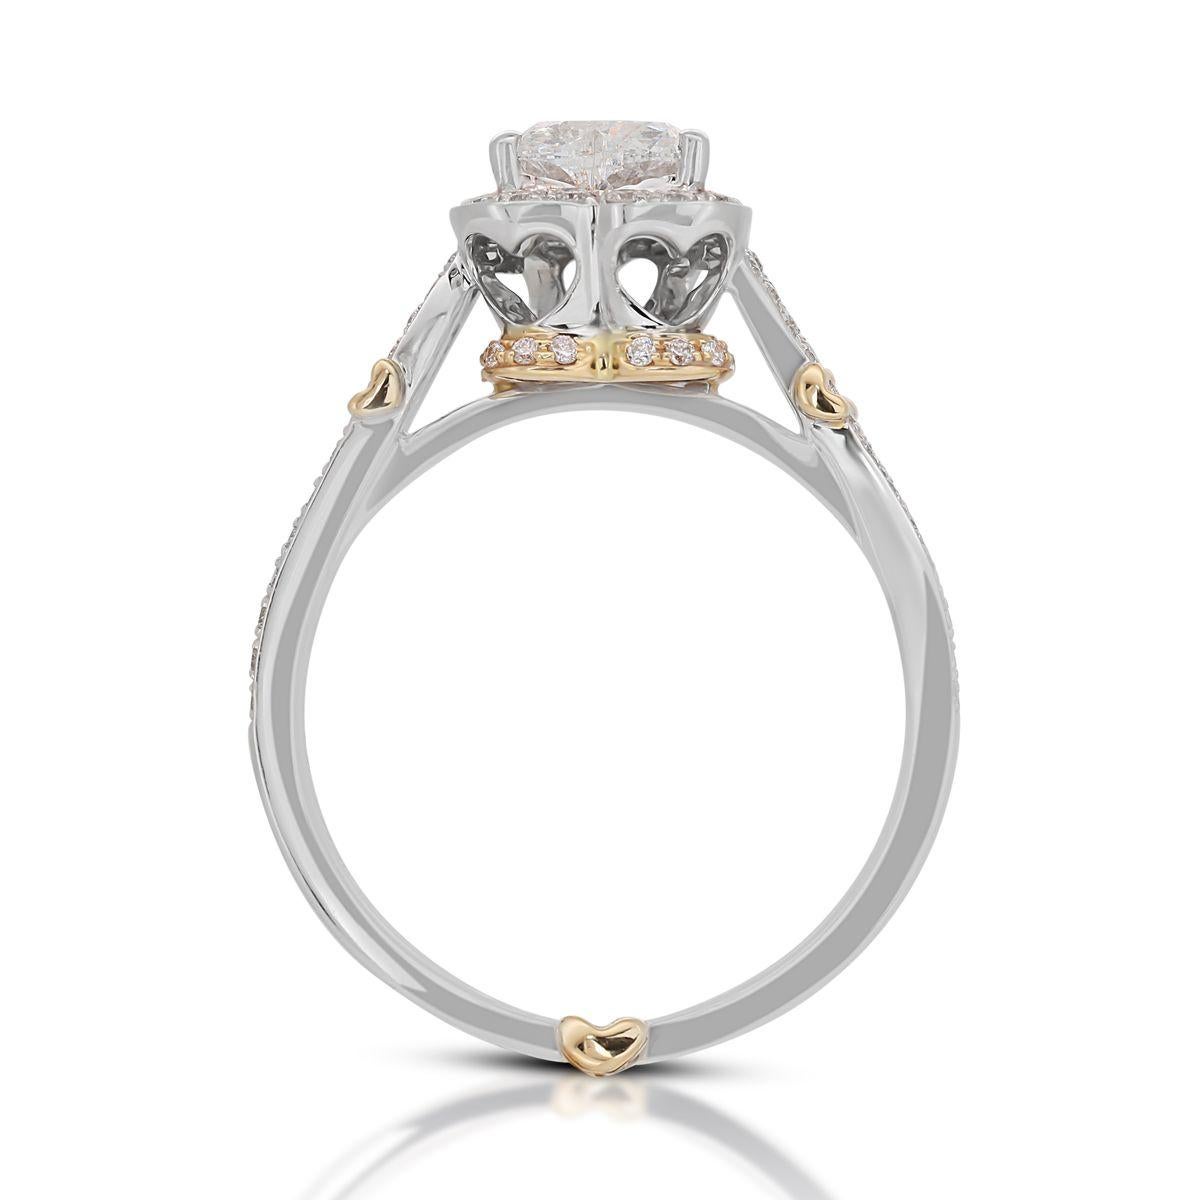 18K White & Yellow Gold Heart Shape Ring with 0.24 Ct Natural Diamonds, GIA Cert For Sale 1